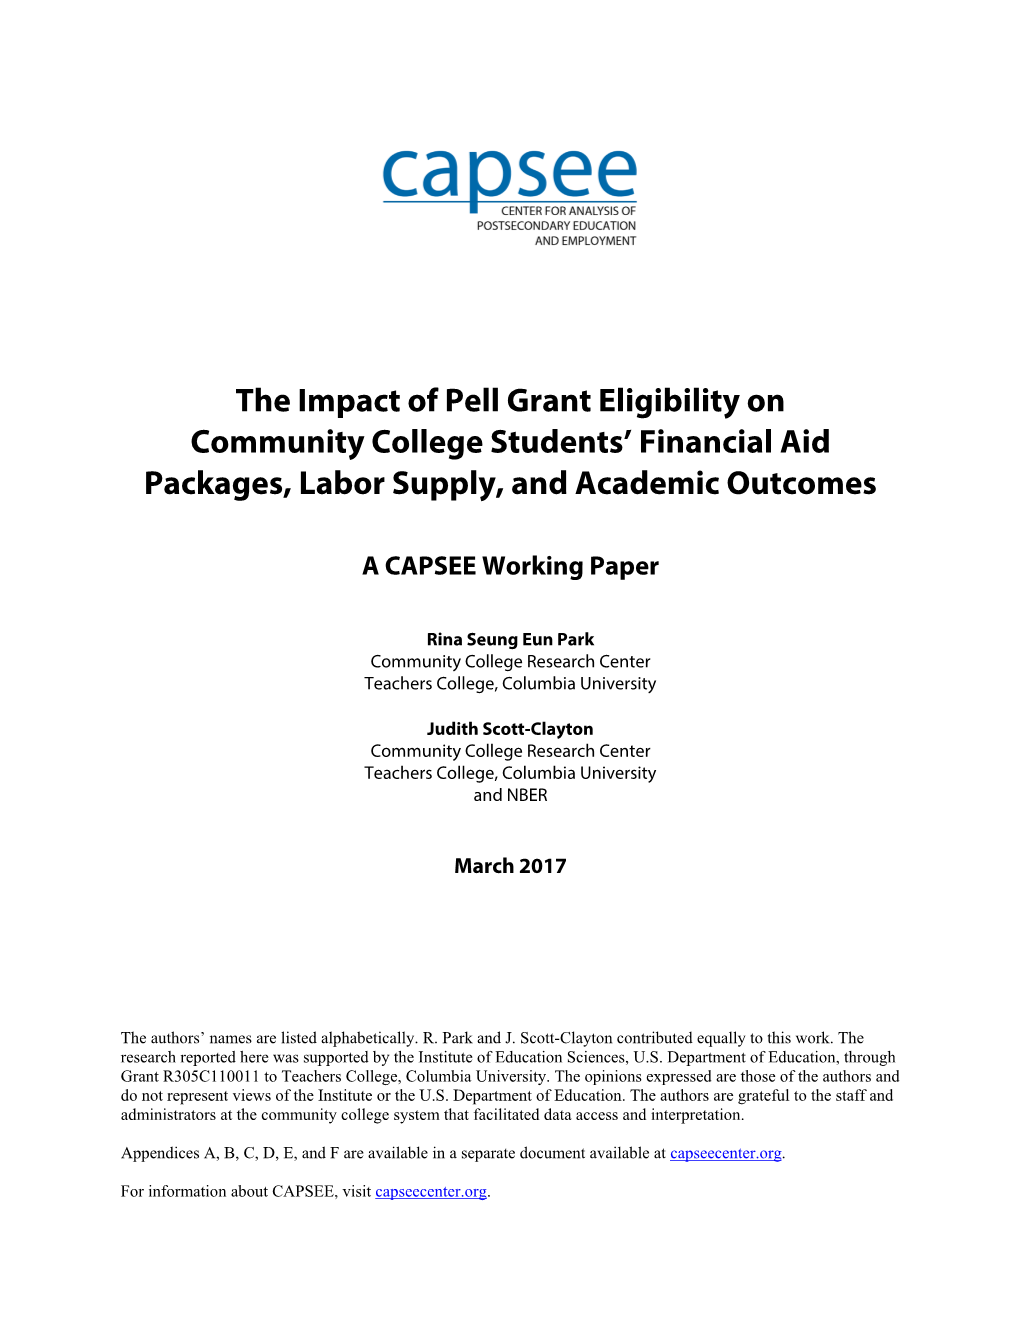 The Impact of Pell Grant Eligibility on Community College Students’ Financial Aid Packages, Labor Supply, and Academic Outcomes